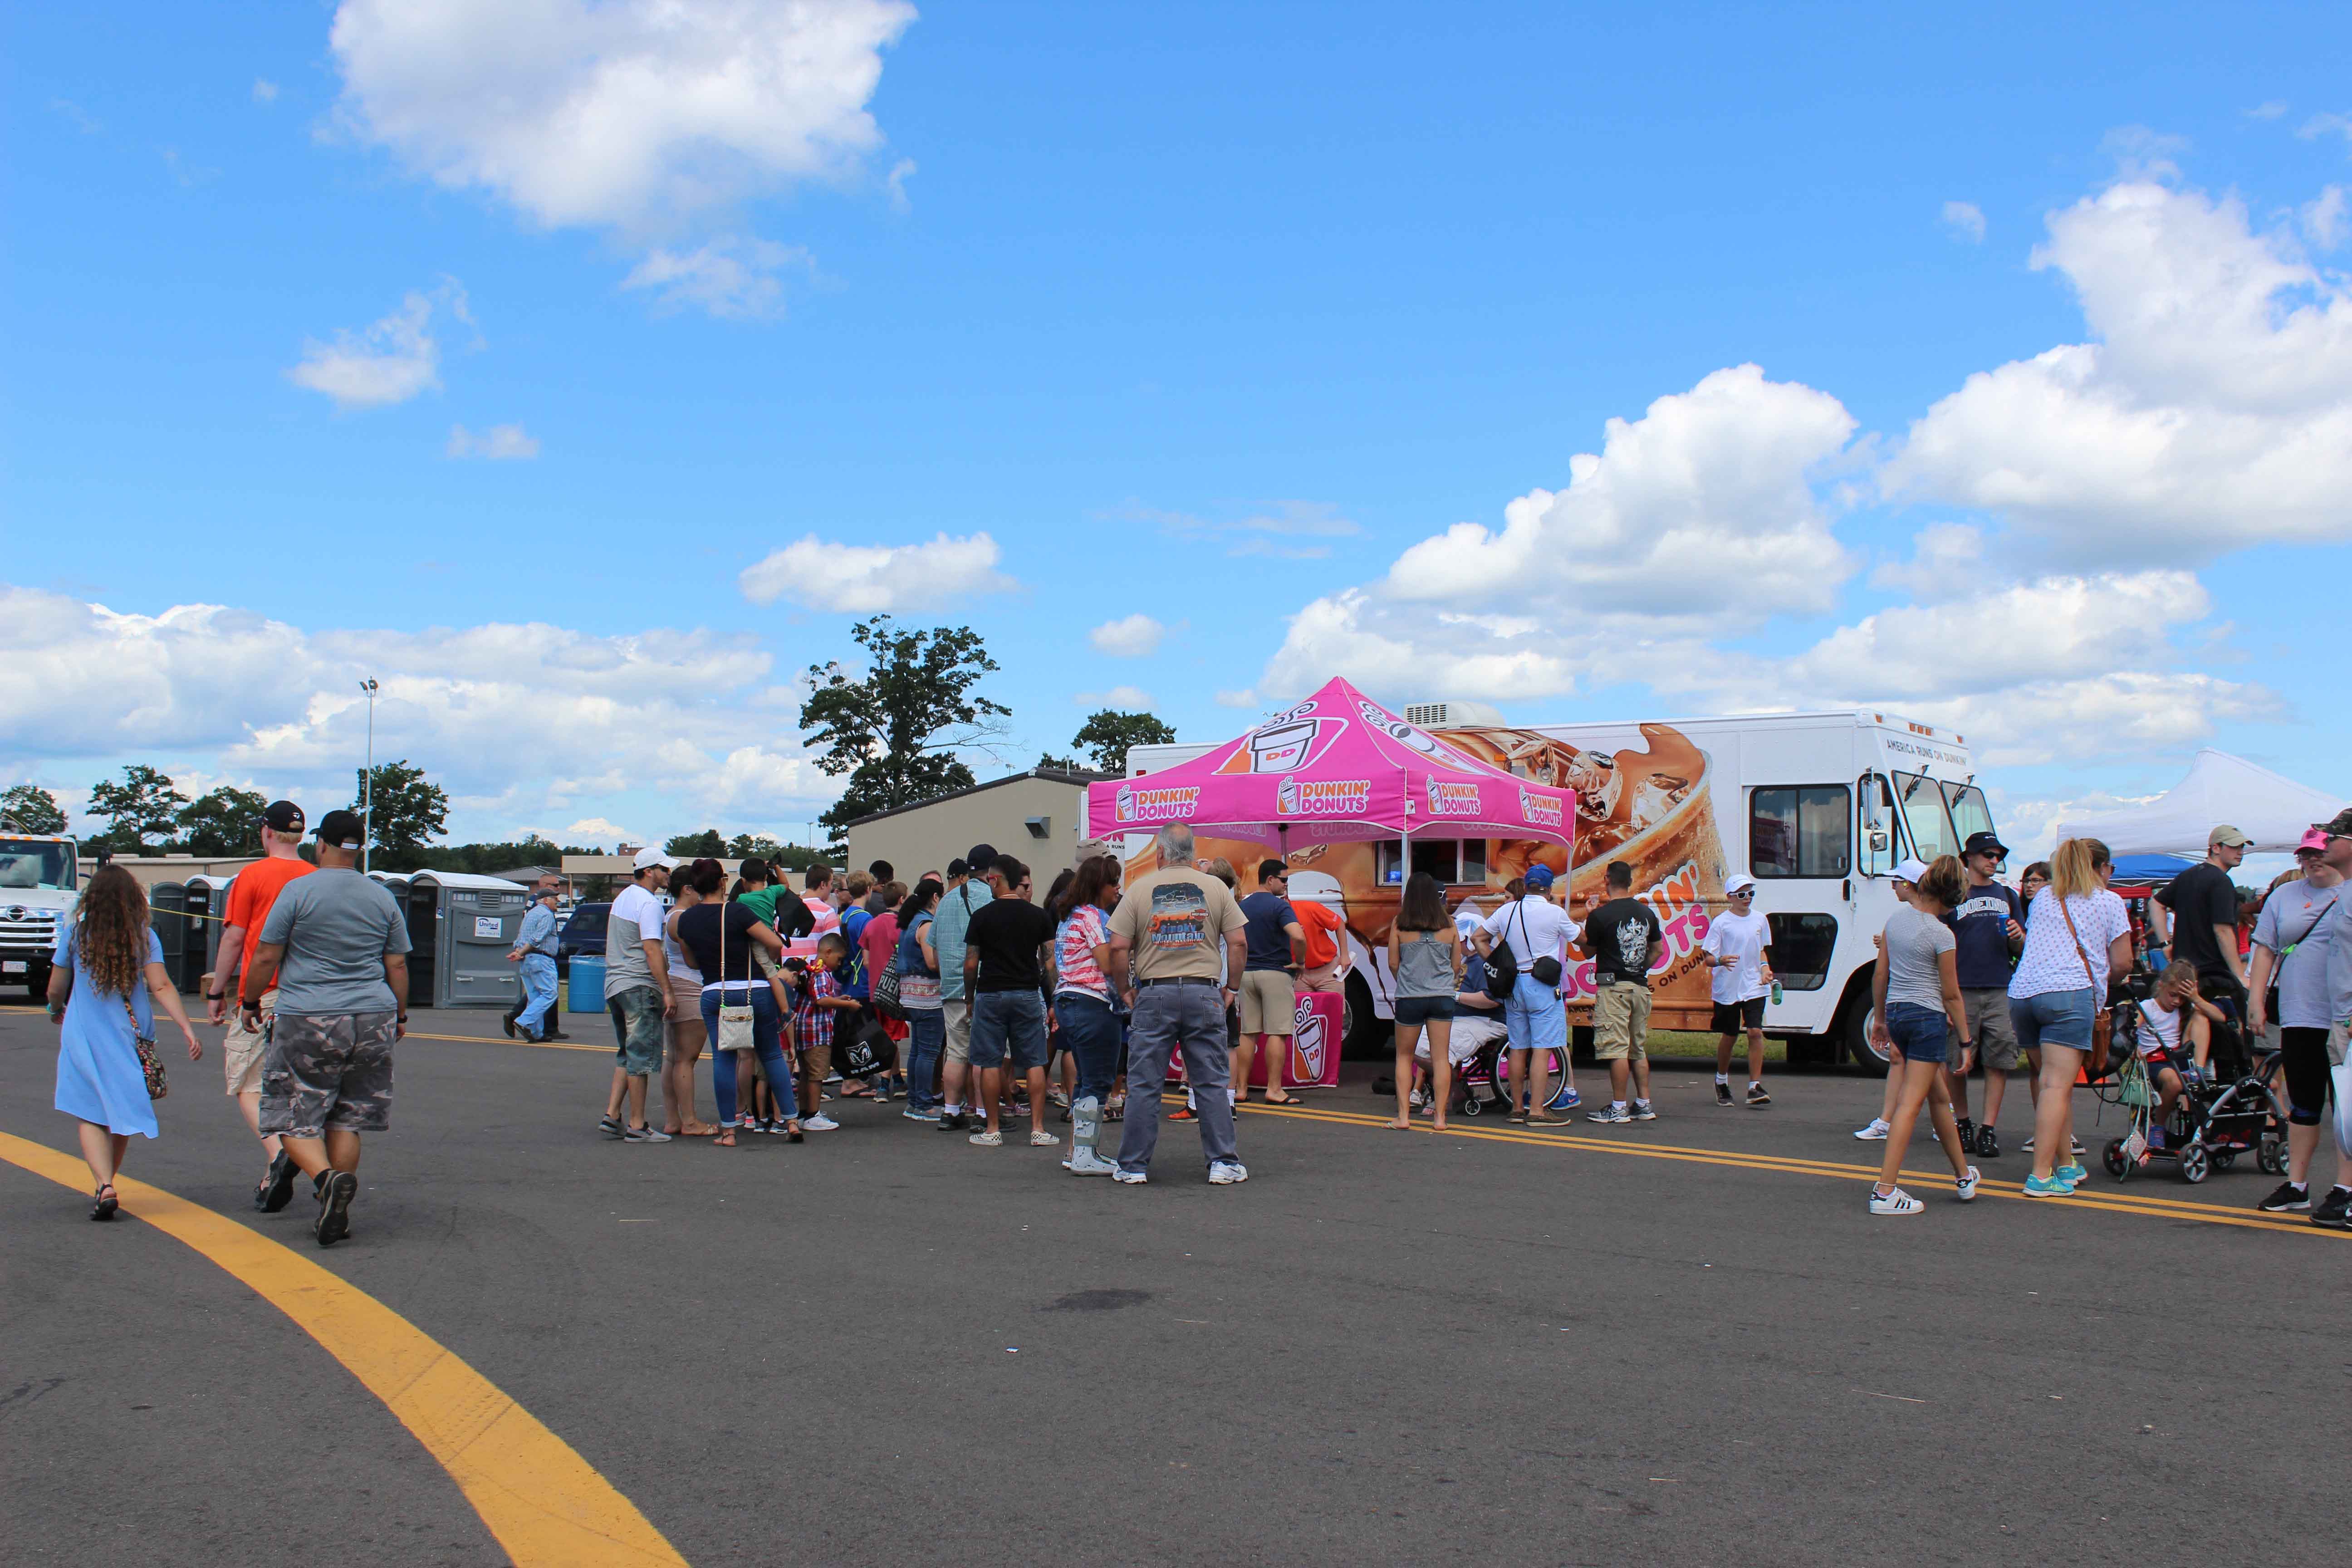 people in line to buy items from Dunkin Donuts food truck with a branded pink popup tent in front of it at an air show